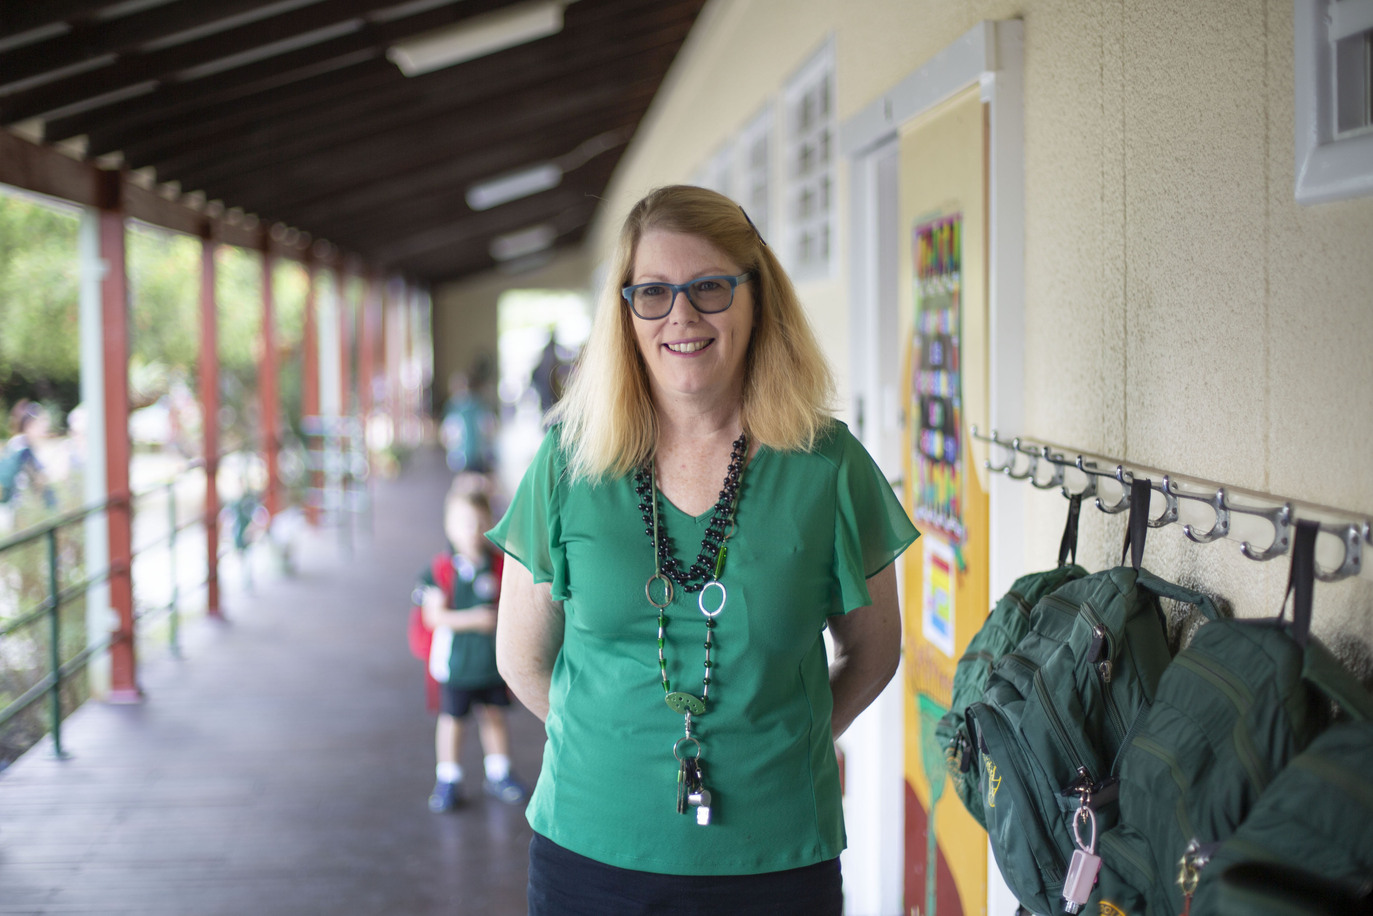 An educator standing outside a school, smiling at the camera